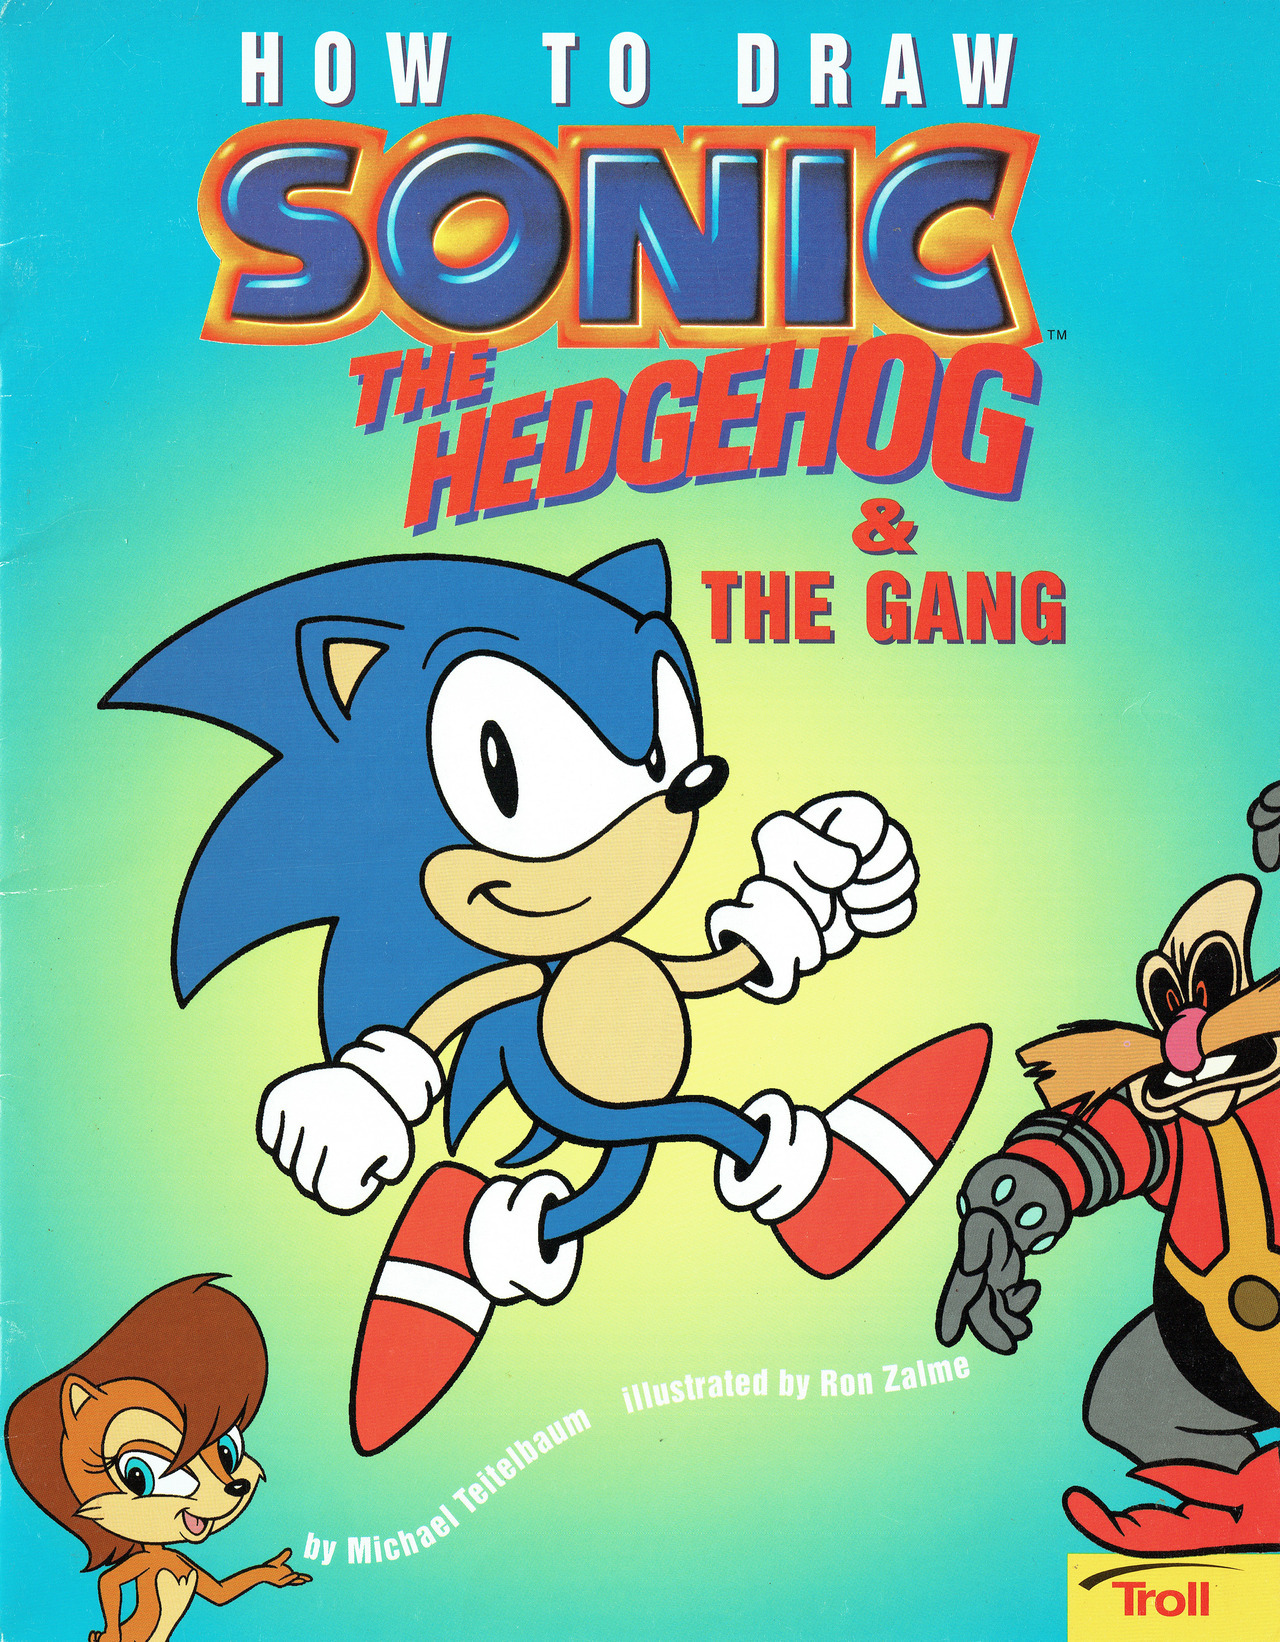 https://static.wikia.nocookie.net/sonic/images/7/7f/How_to_Draw_Sonic_the_Hedgehog_%26_the_Gang.jpeg/revision/latest?cb=20210313204129